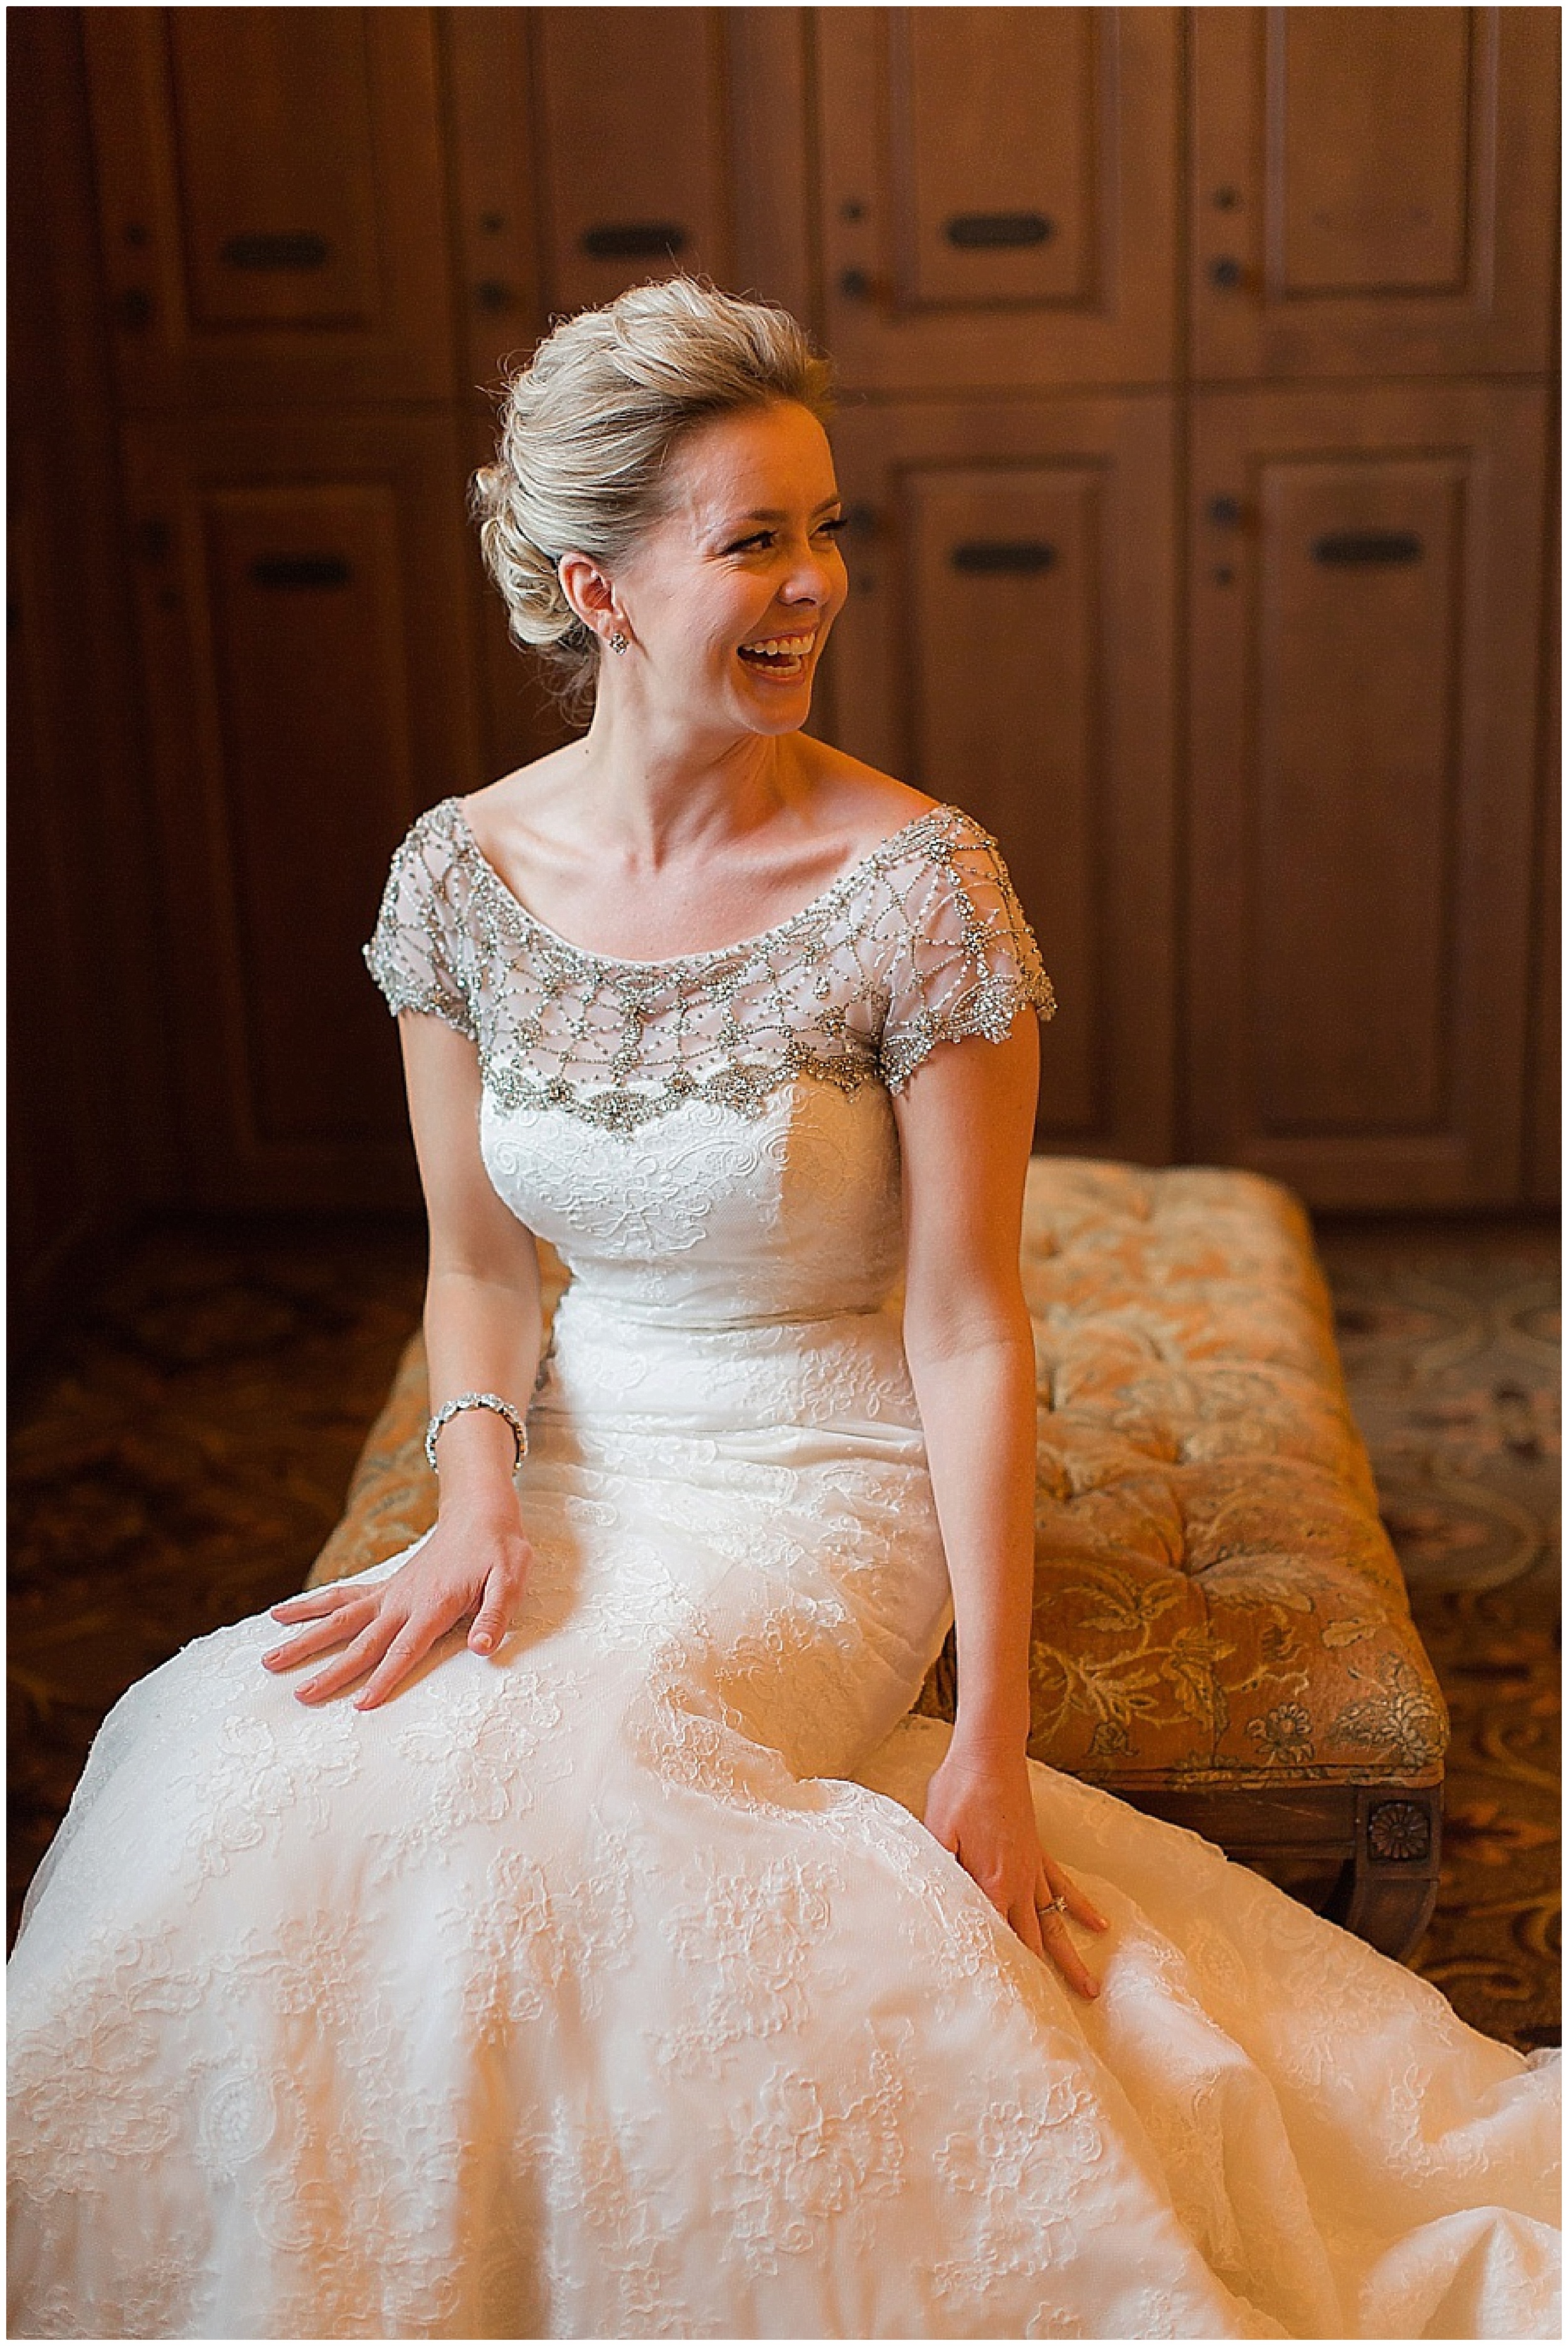 Bridal Portrait in Lacey Sleeved Dress 